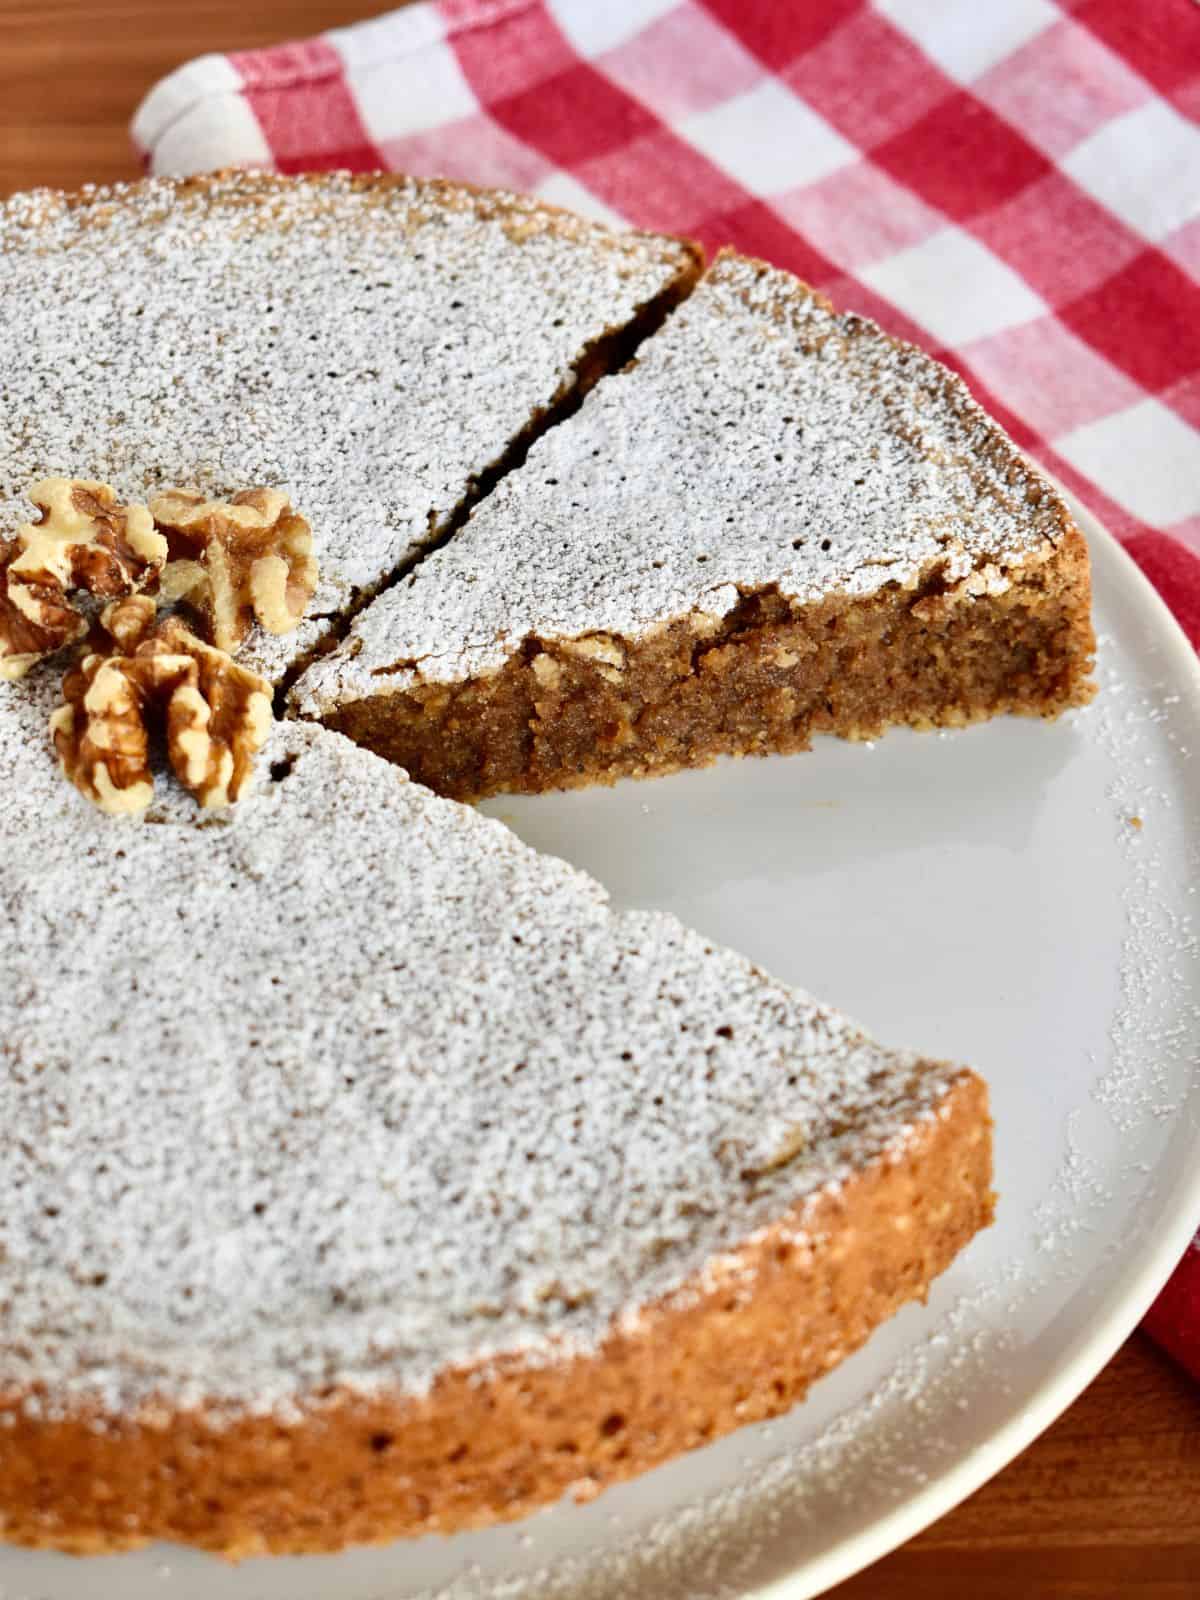 Italian Walnut Cake or Torta di Noci on a white plate with a checkered napkin in the background.